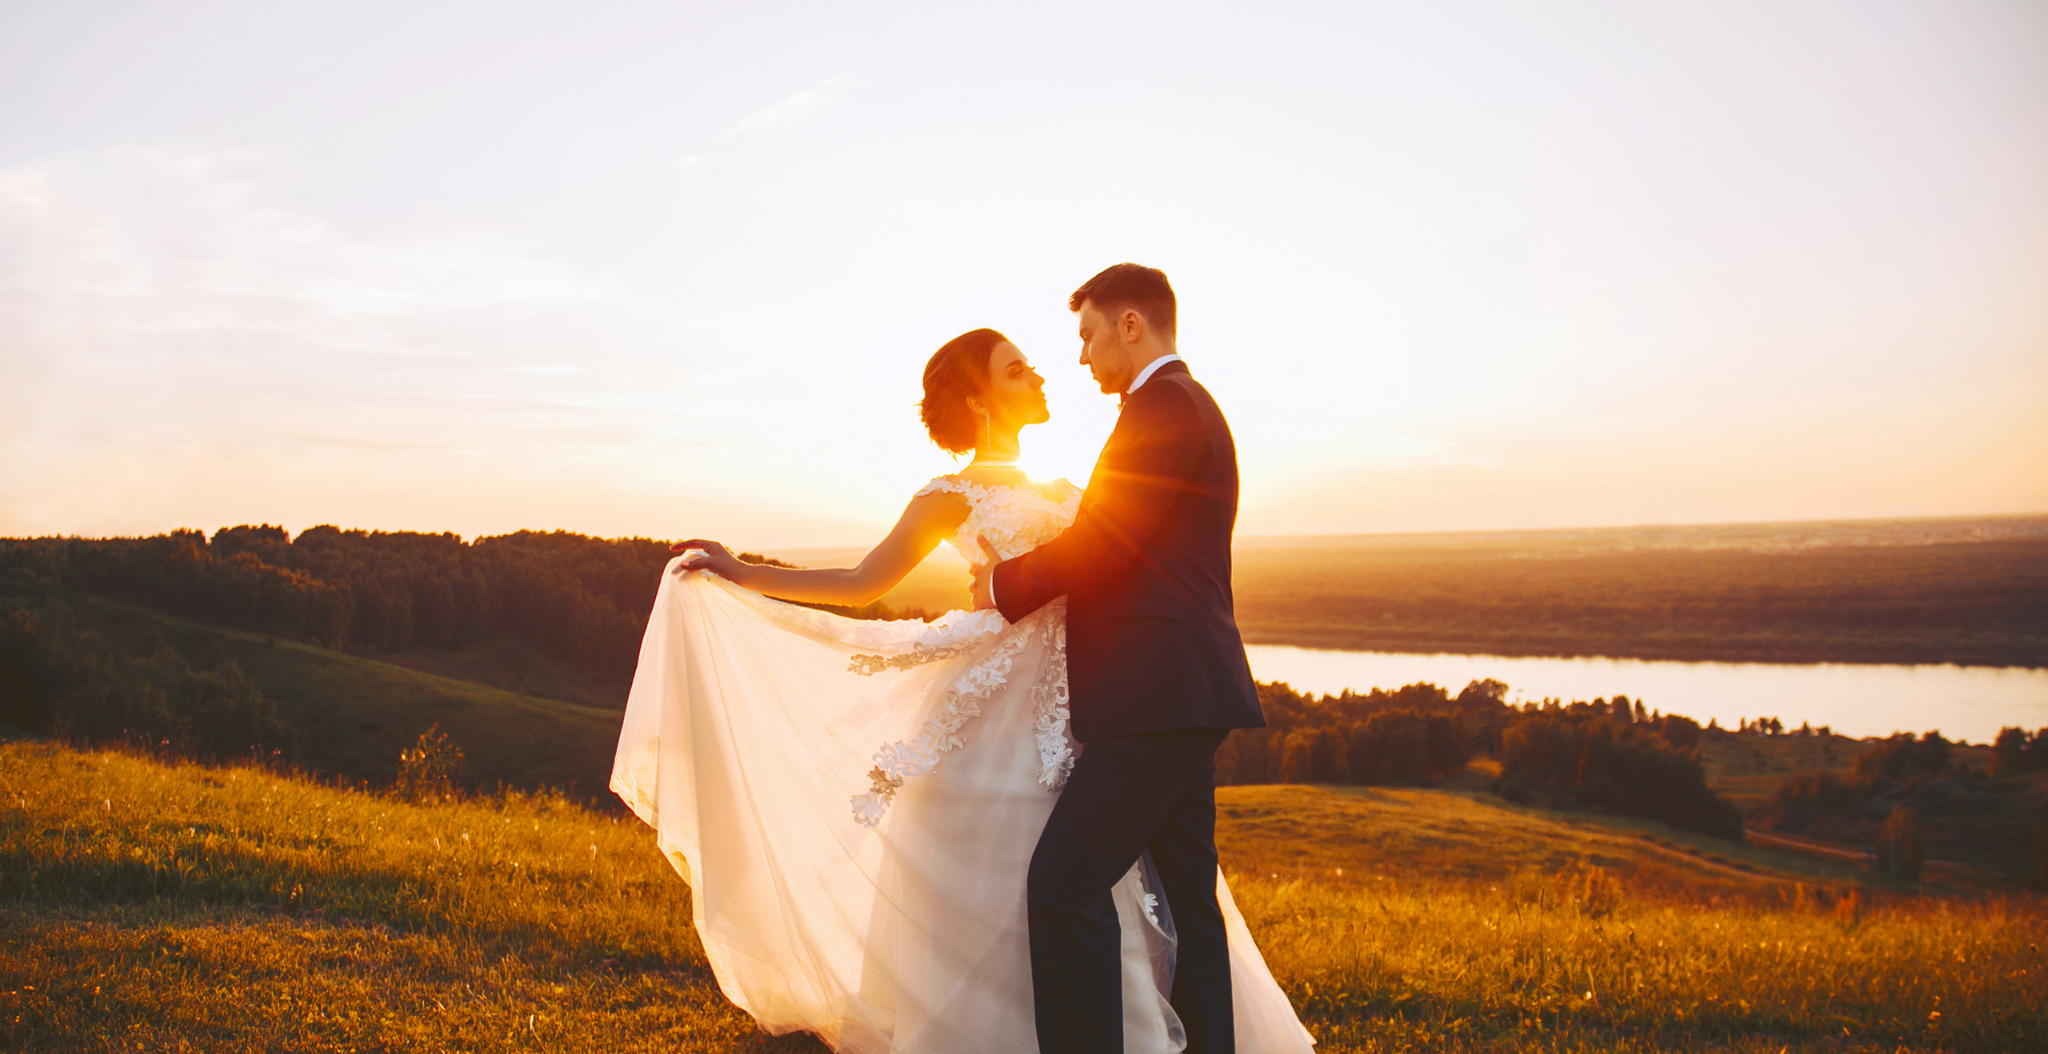 Tips to protect your wedding attire